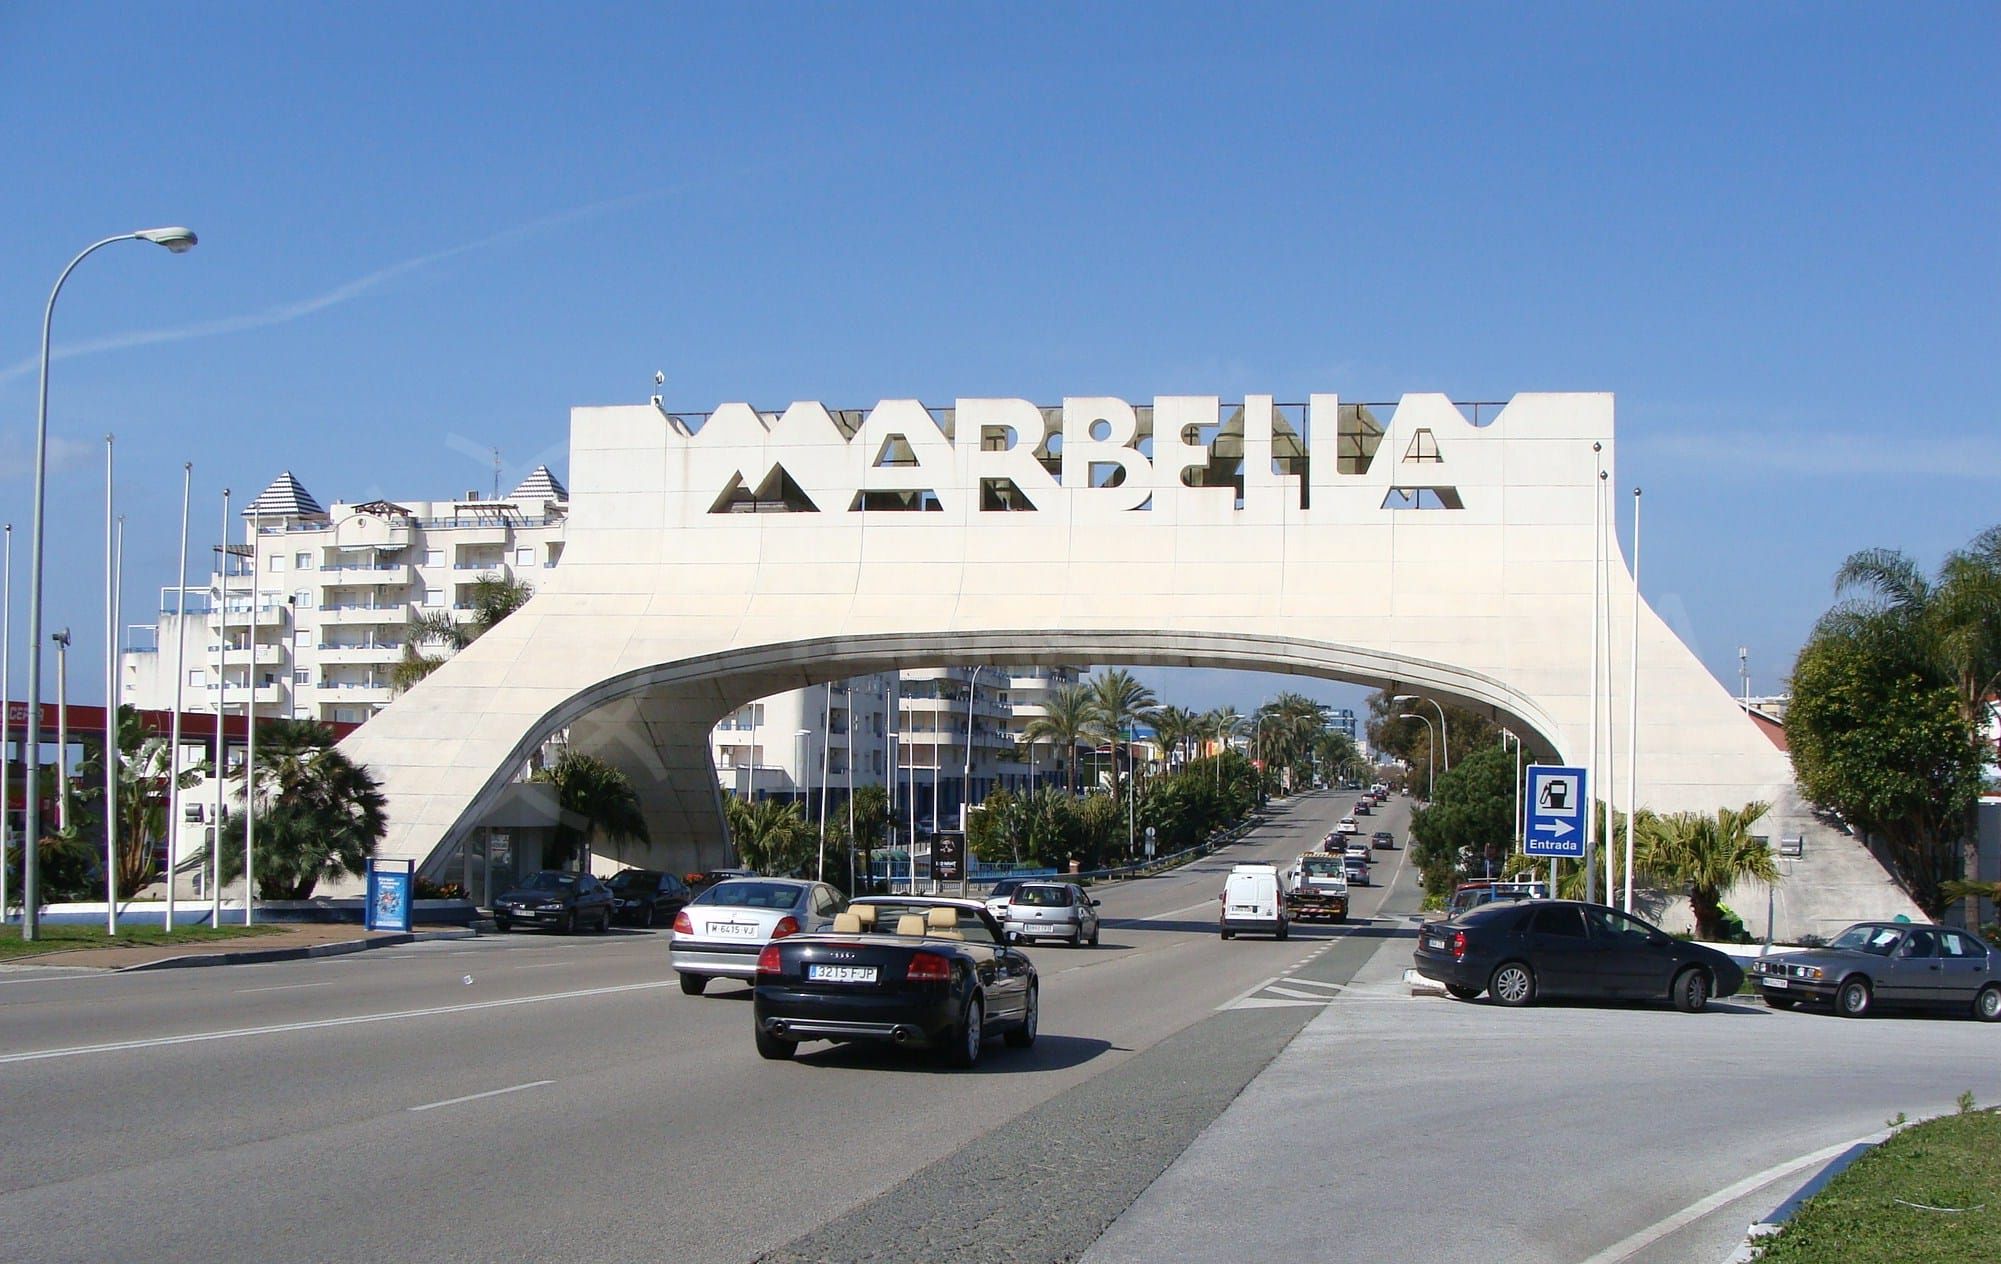 The forecast? Sunshine and clear skies for Marbella